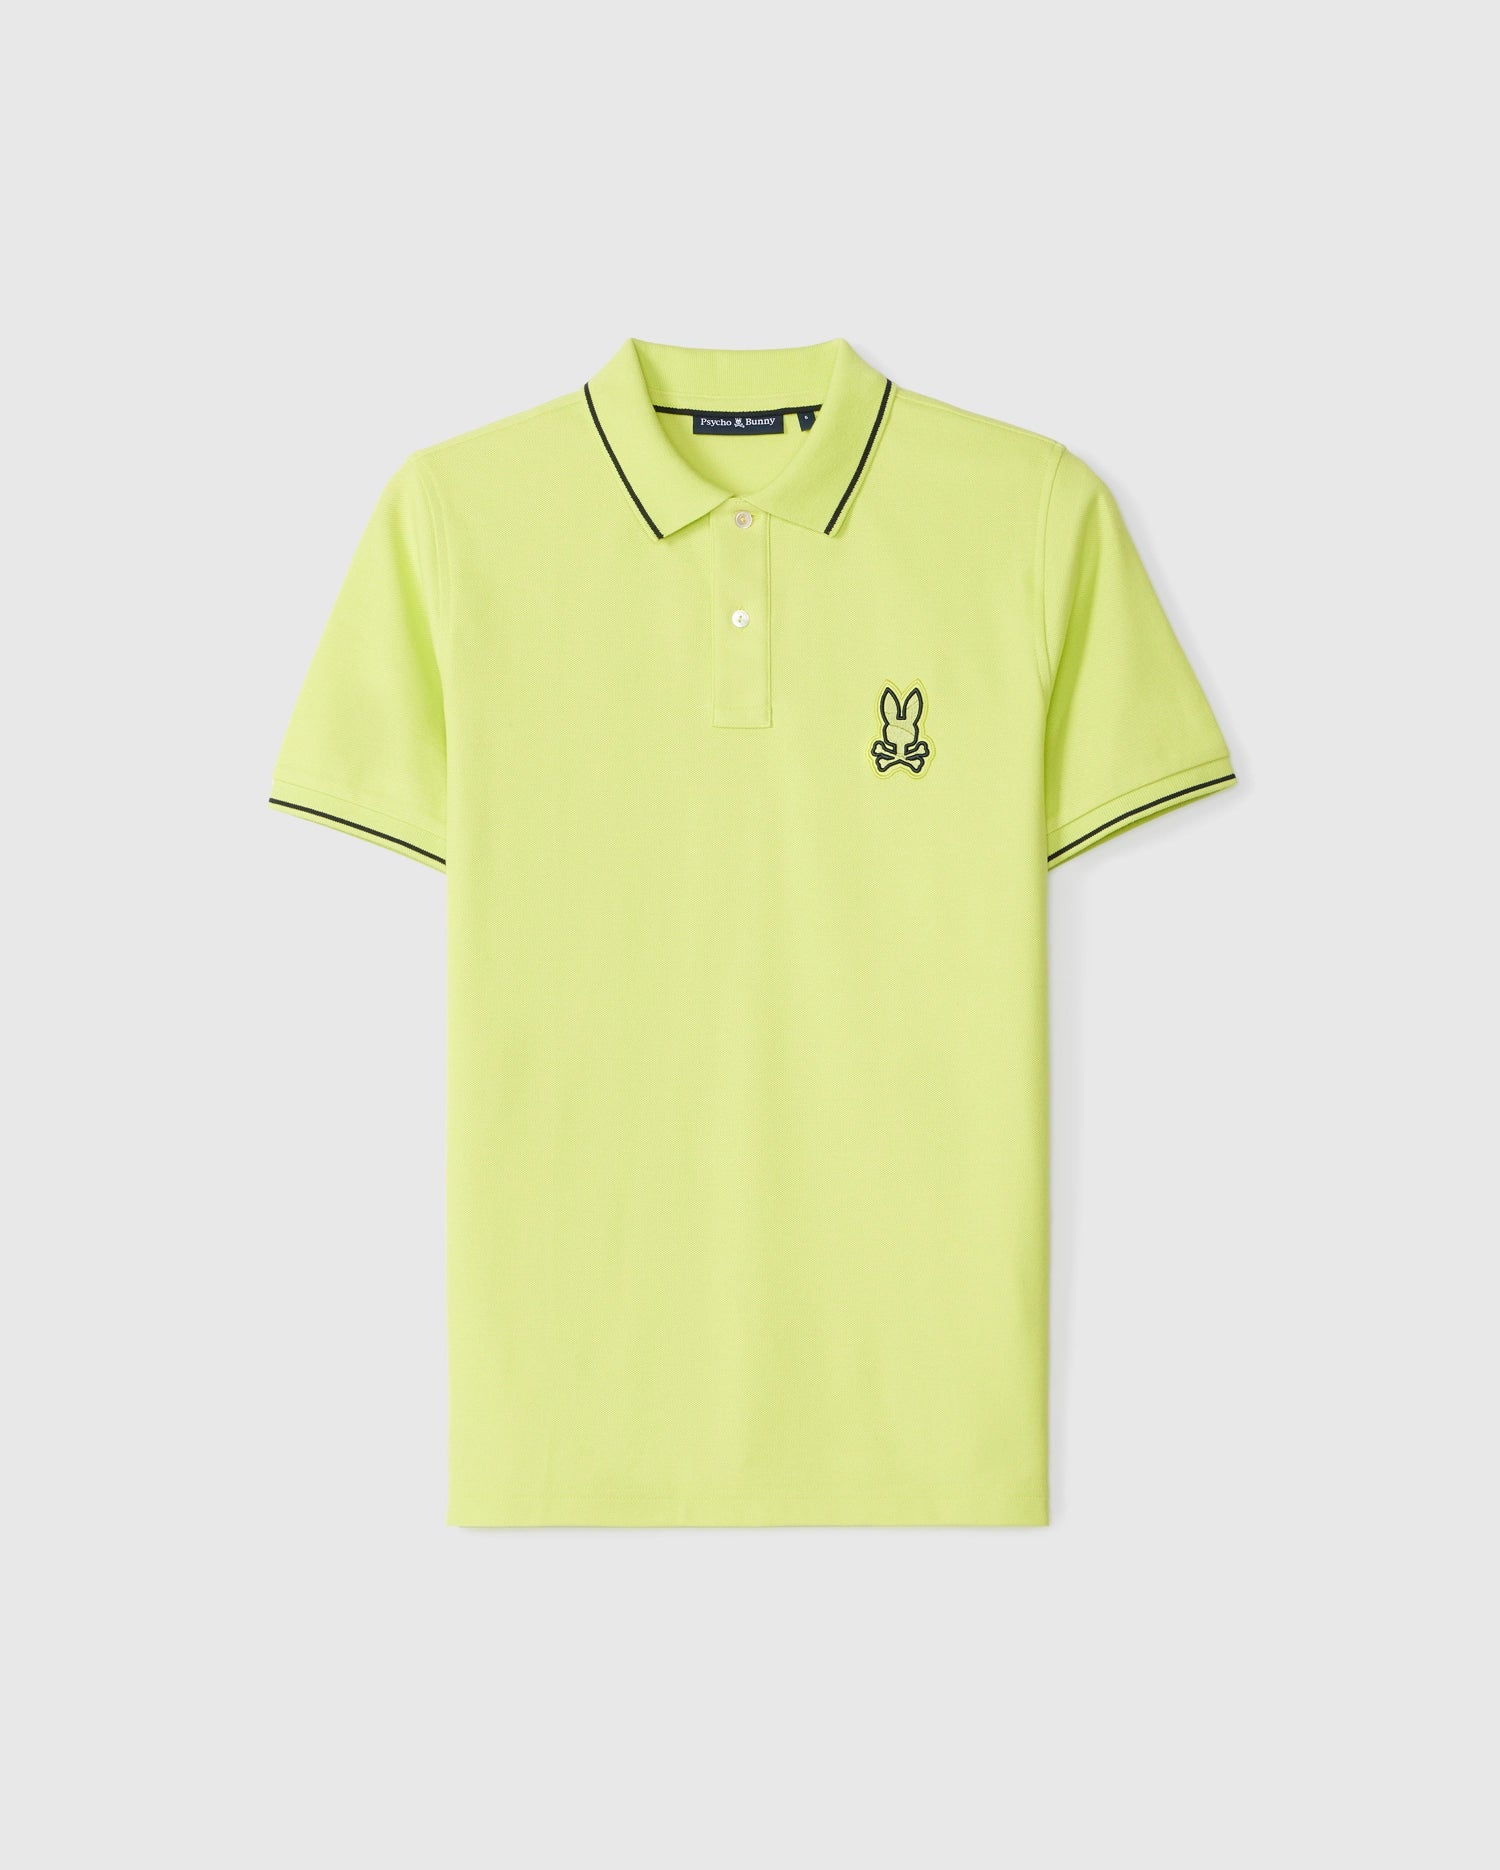 A lime green Pima cotton polo shirt with black trim on the collar and sleeves. It features an embroidered bunny head wearing sunglasses on the upper left chest area. The MENS LENOX PIQUE POLO SHIRT - B6K138B200 by Psycho Bunny includes a buttoned placket with two mother-of-pearl buttons.